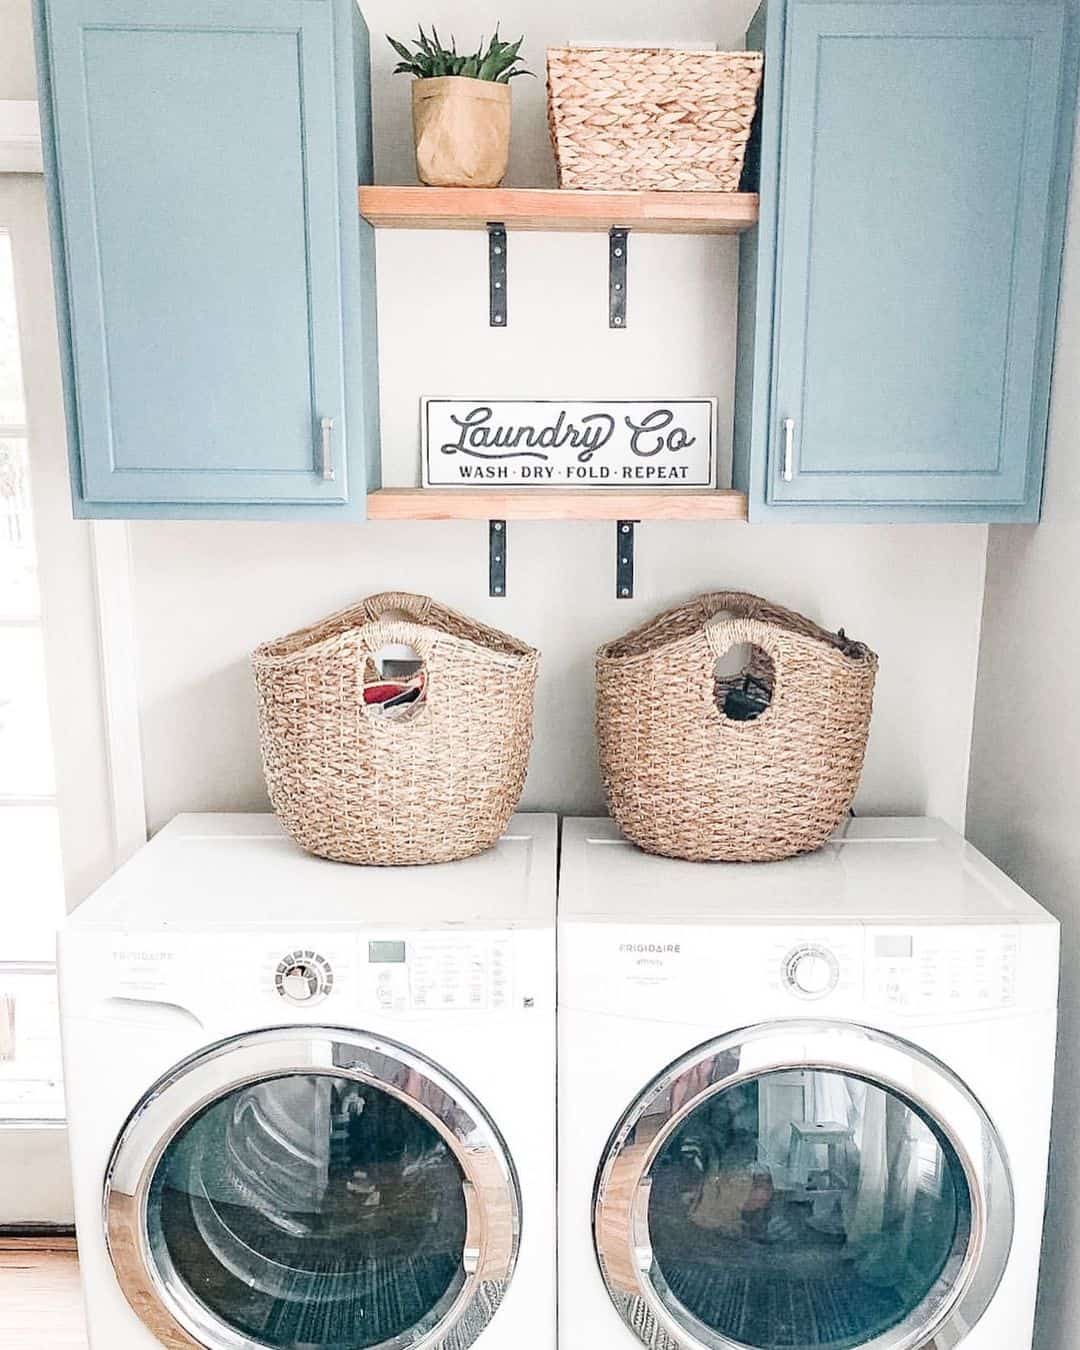 27 Laundry Room Shelving Ideas for an Organized Space